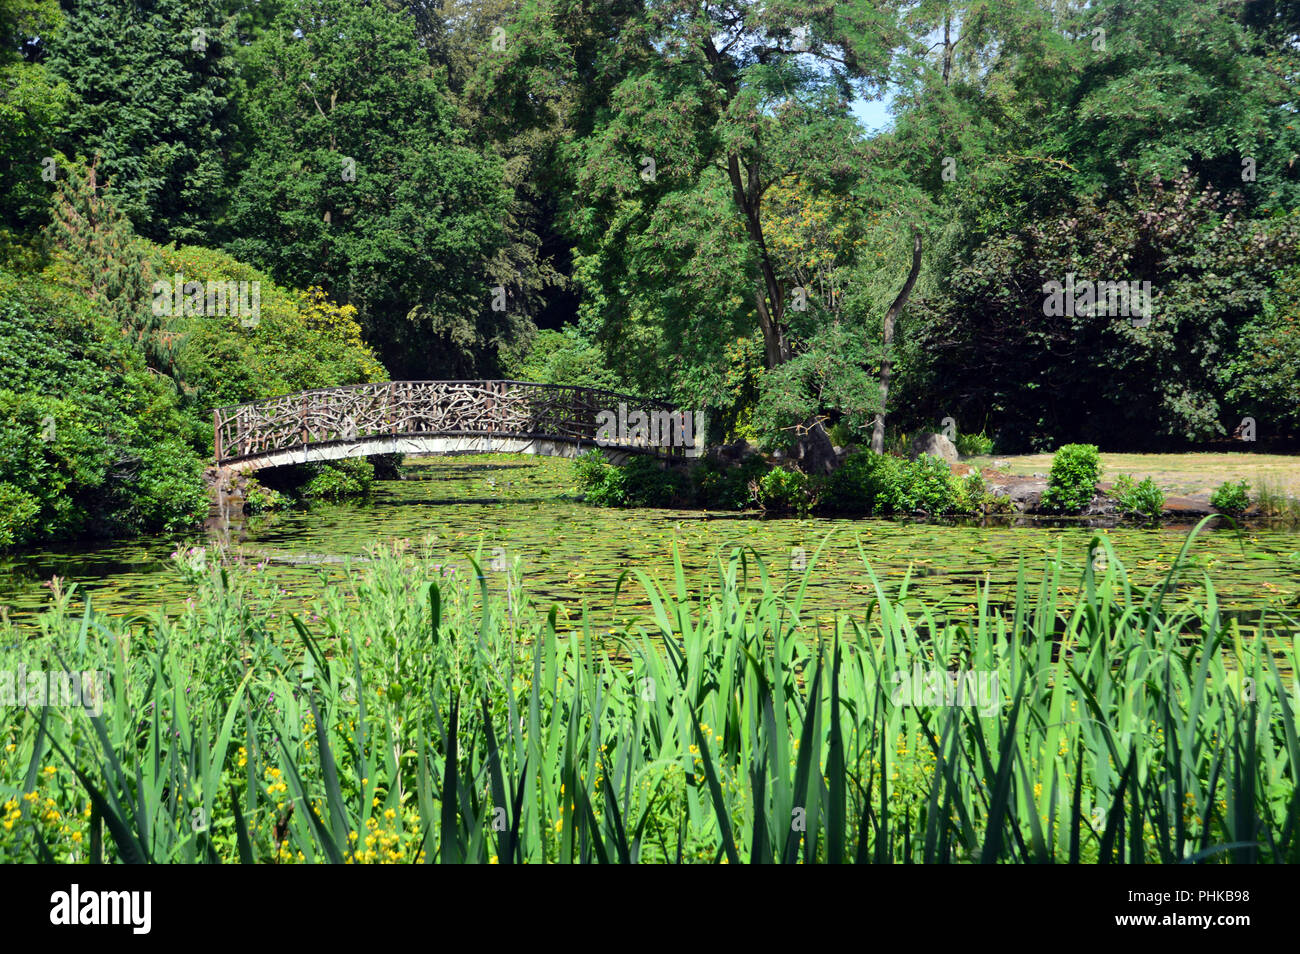 The Wooden Bridge over the Pond in the Japanese Garden at Tatton Park, Knutsford, Cheshire, England, UK. Stock Photo